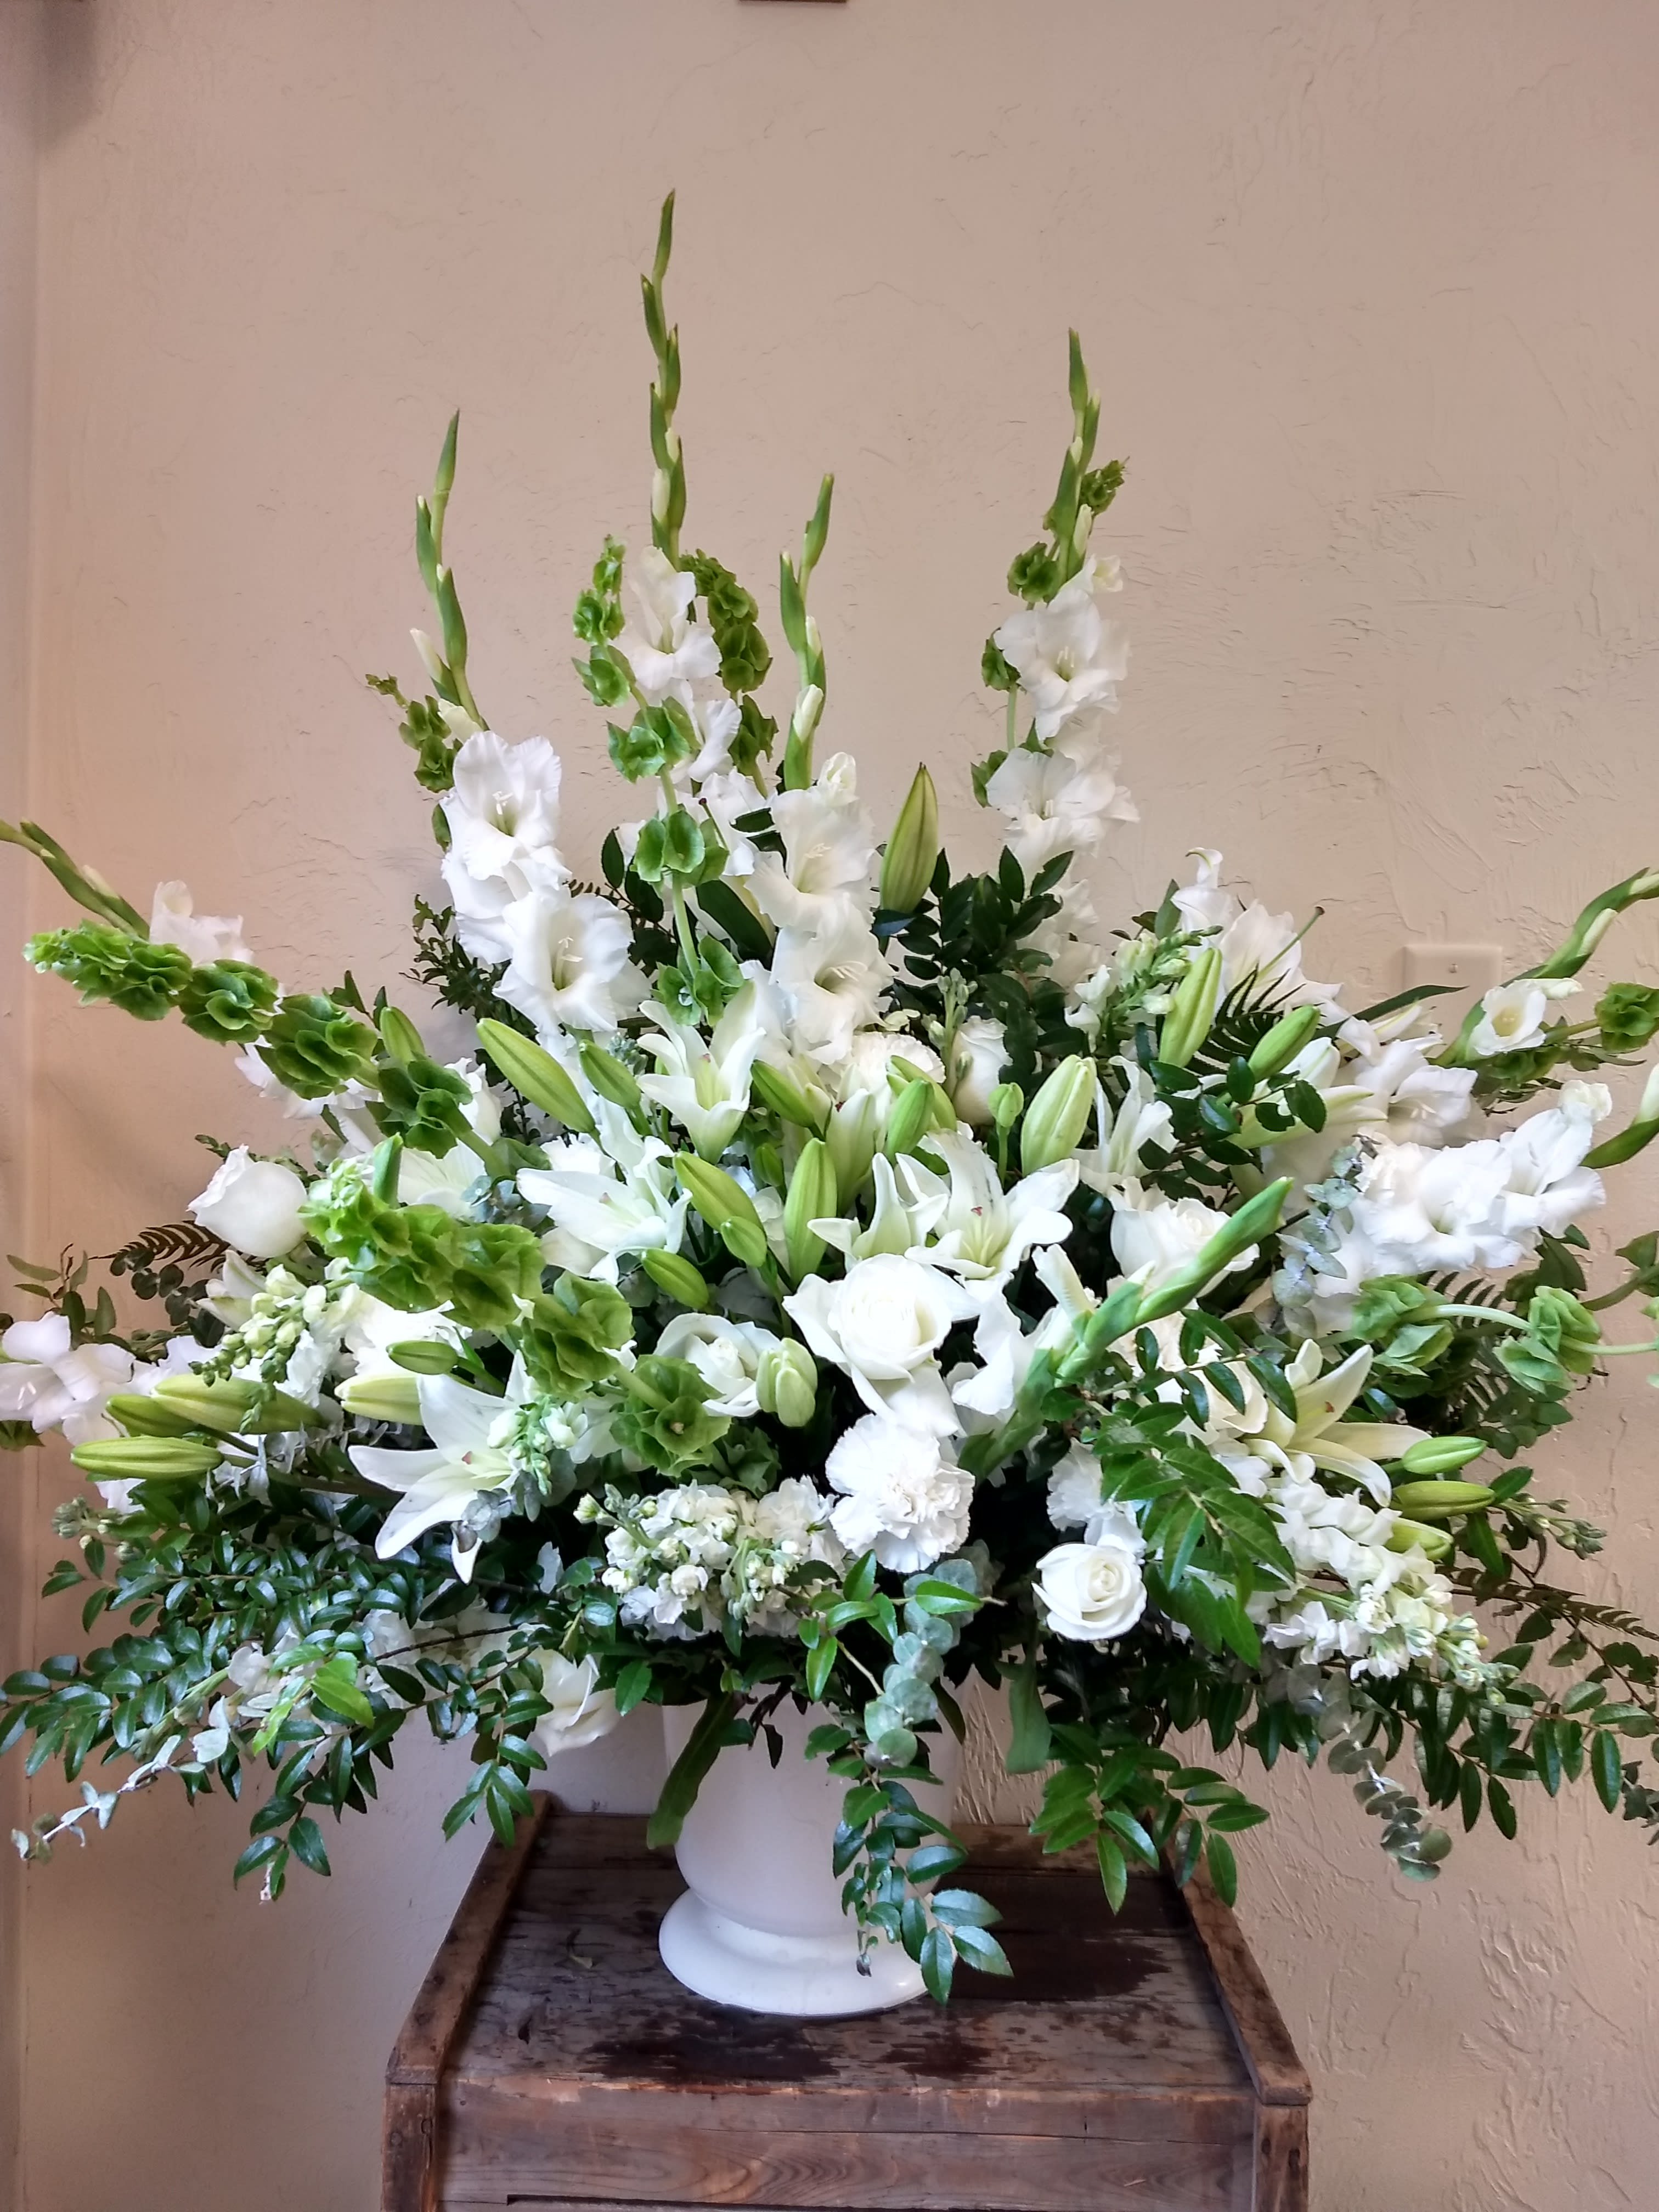 Rising Star by Cricket's Flowers cfS24438p - This sympthy arrangement is a brilliant expression of peace and soft serenity. White roses, carnations, gladiolus, stock and Oriental lilies are accented with stems of Bells of Ireland and an assortment of lush greens, in a white urn.  **** Please note: 48 hour notice MAYBE REQUIRED We custom-design this arrangement using best-of-day seasonal flowers. This image is a general representation of its size and style and may not feature the exact flowers shown. Due to disruptions in the global supply chain and staff shortages, we may have to make last minute substitutions to your selected design. If we need to make significant changes we will call you first to get your approval*** Thank you for understanding.